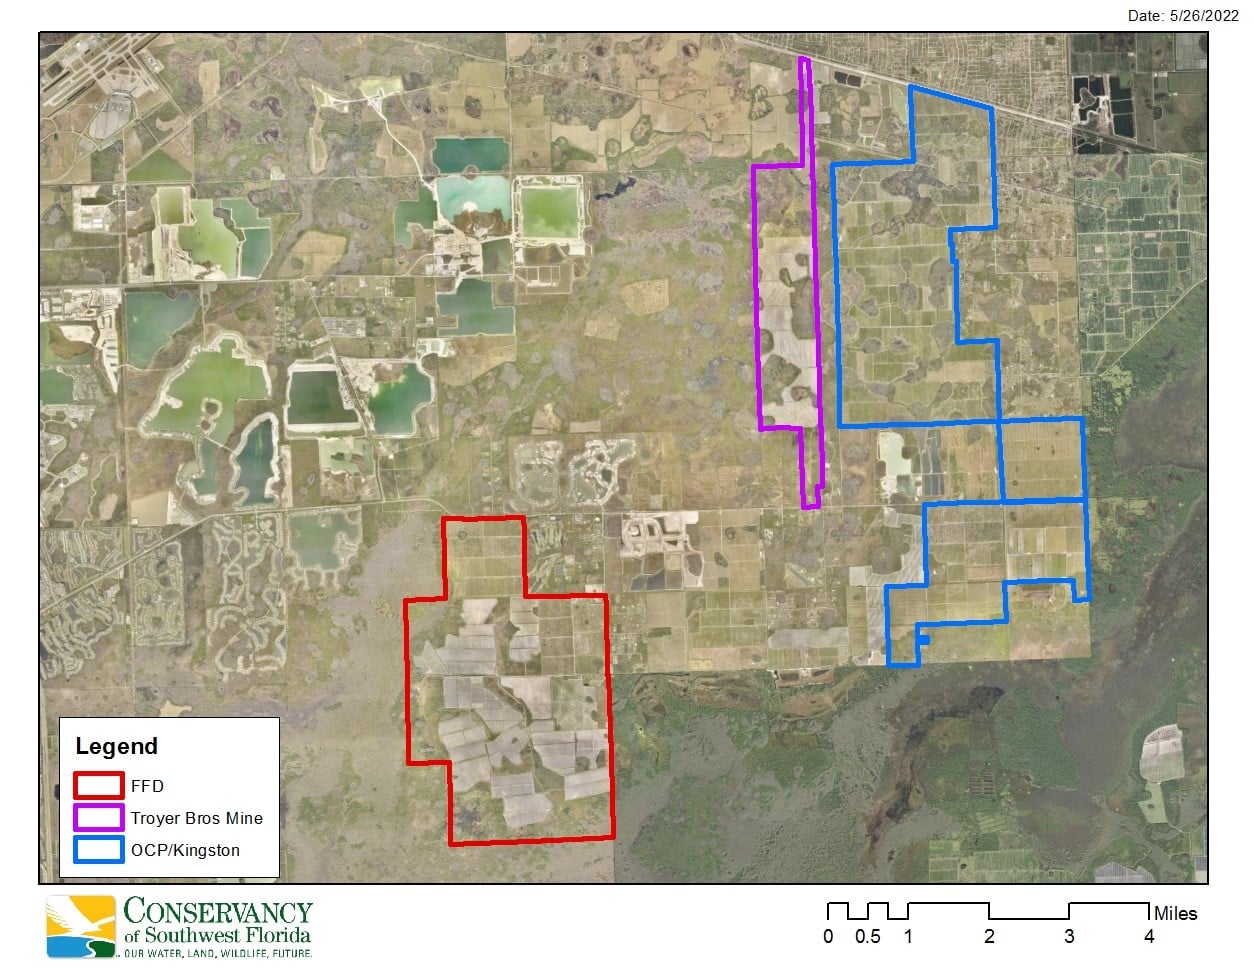 Map outlining different develpments in eastern Lee County